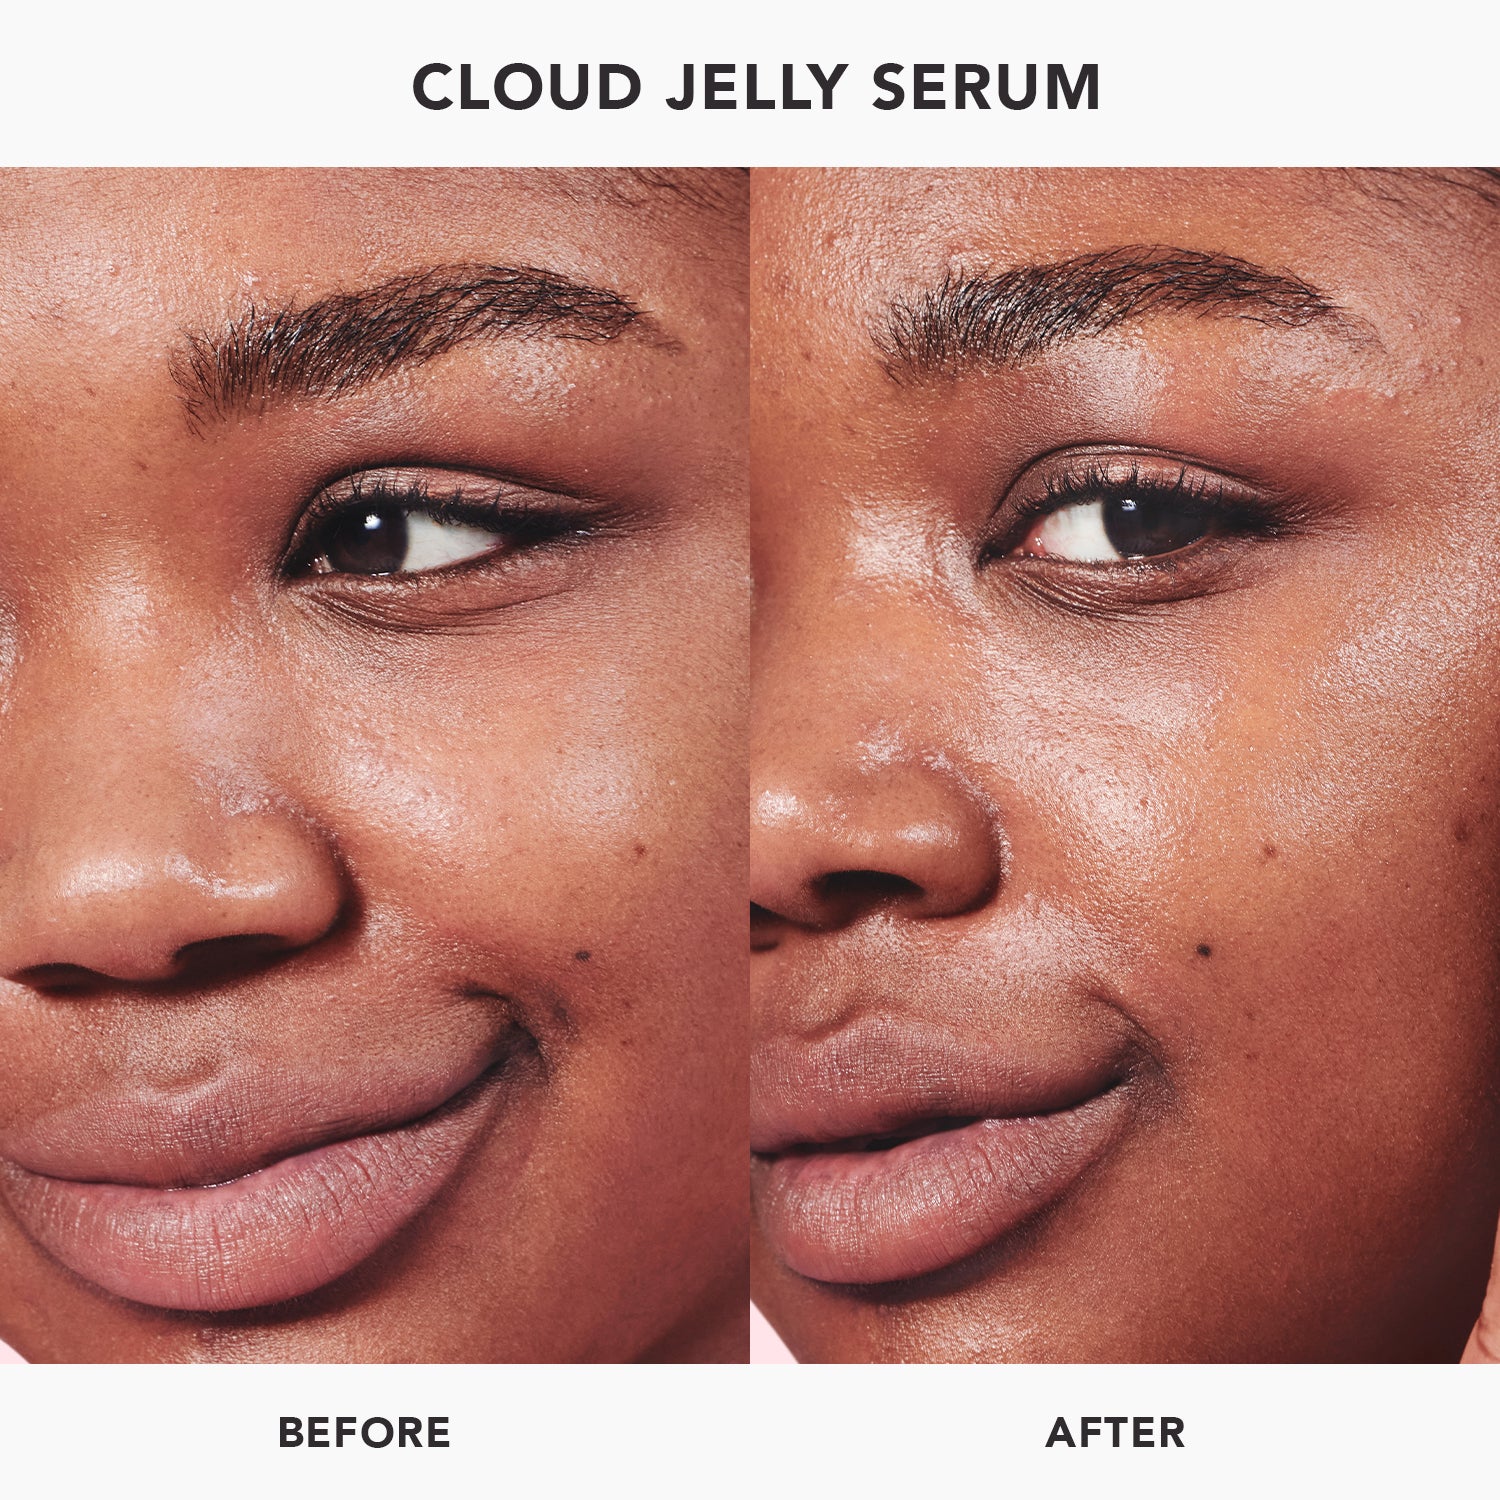 Side-by-side before and after photos of a woman's face using Cloud Jelly Serum, titled "Cloud Jelly Serum" 